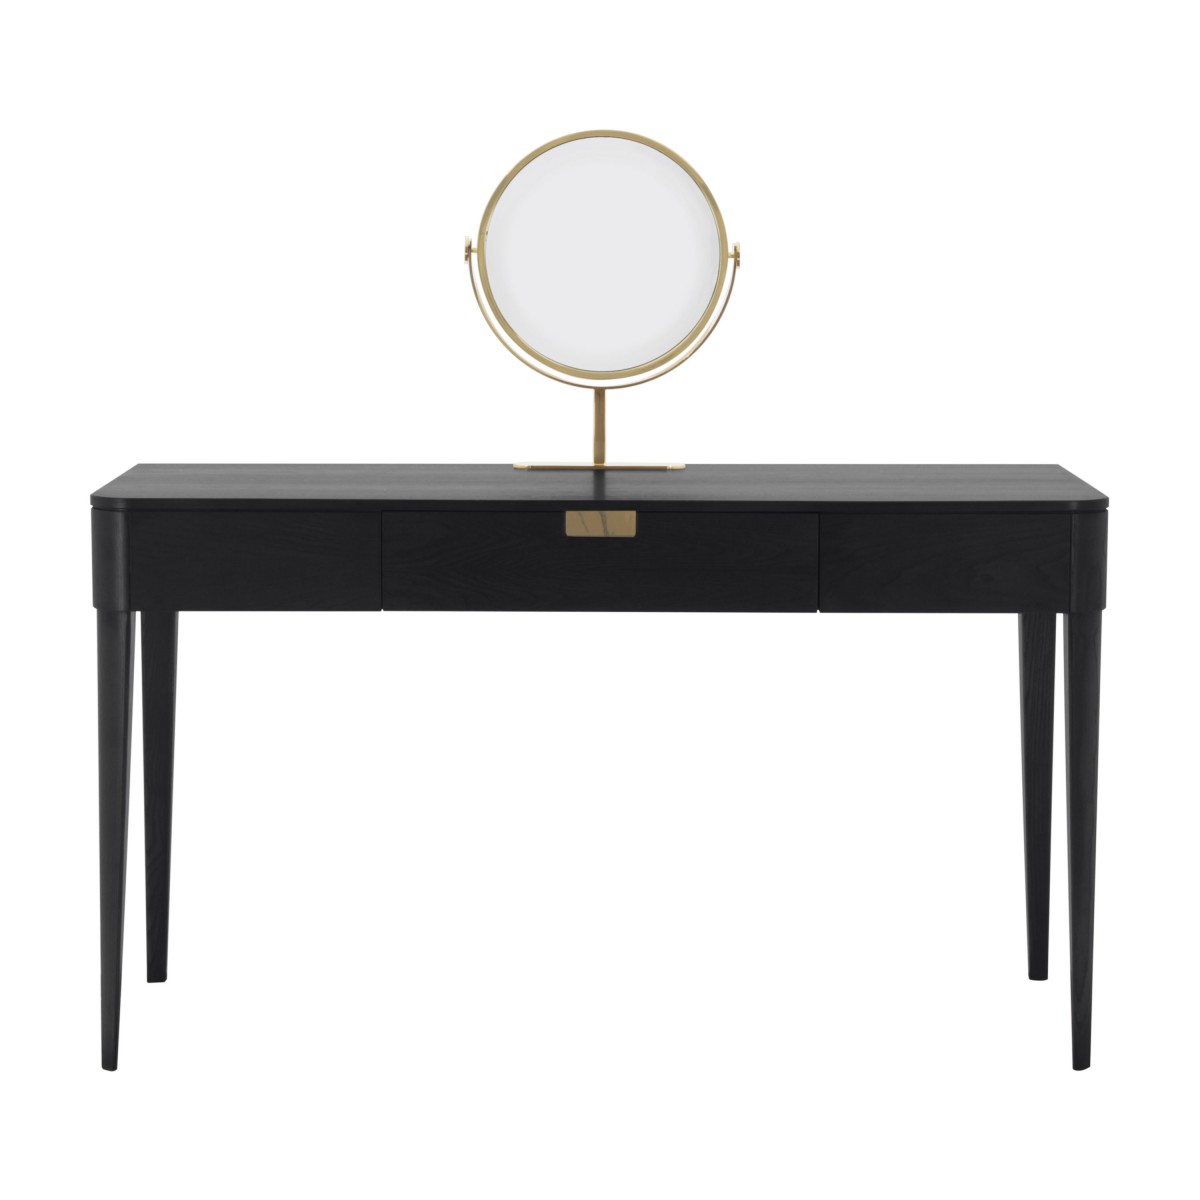 Modern Ash wood consolle, with gold plated round mirror